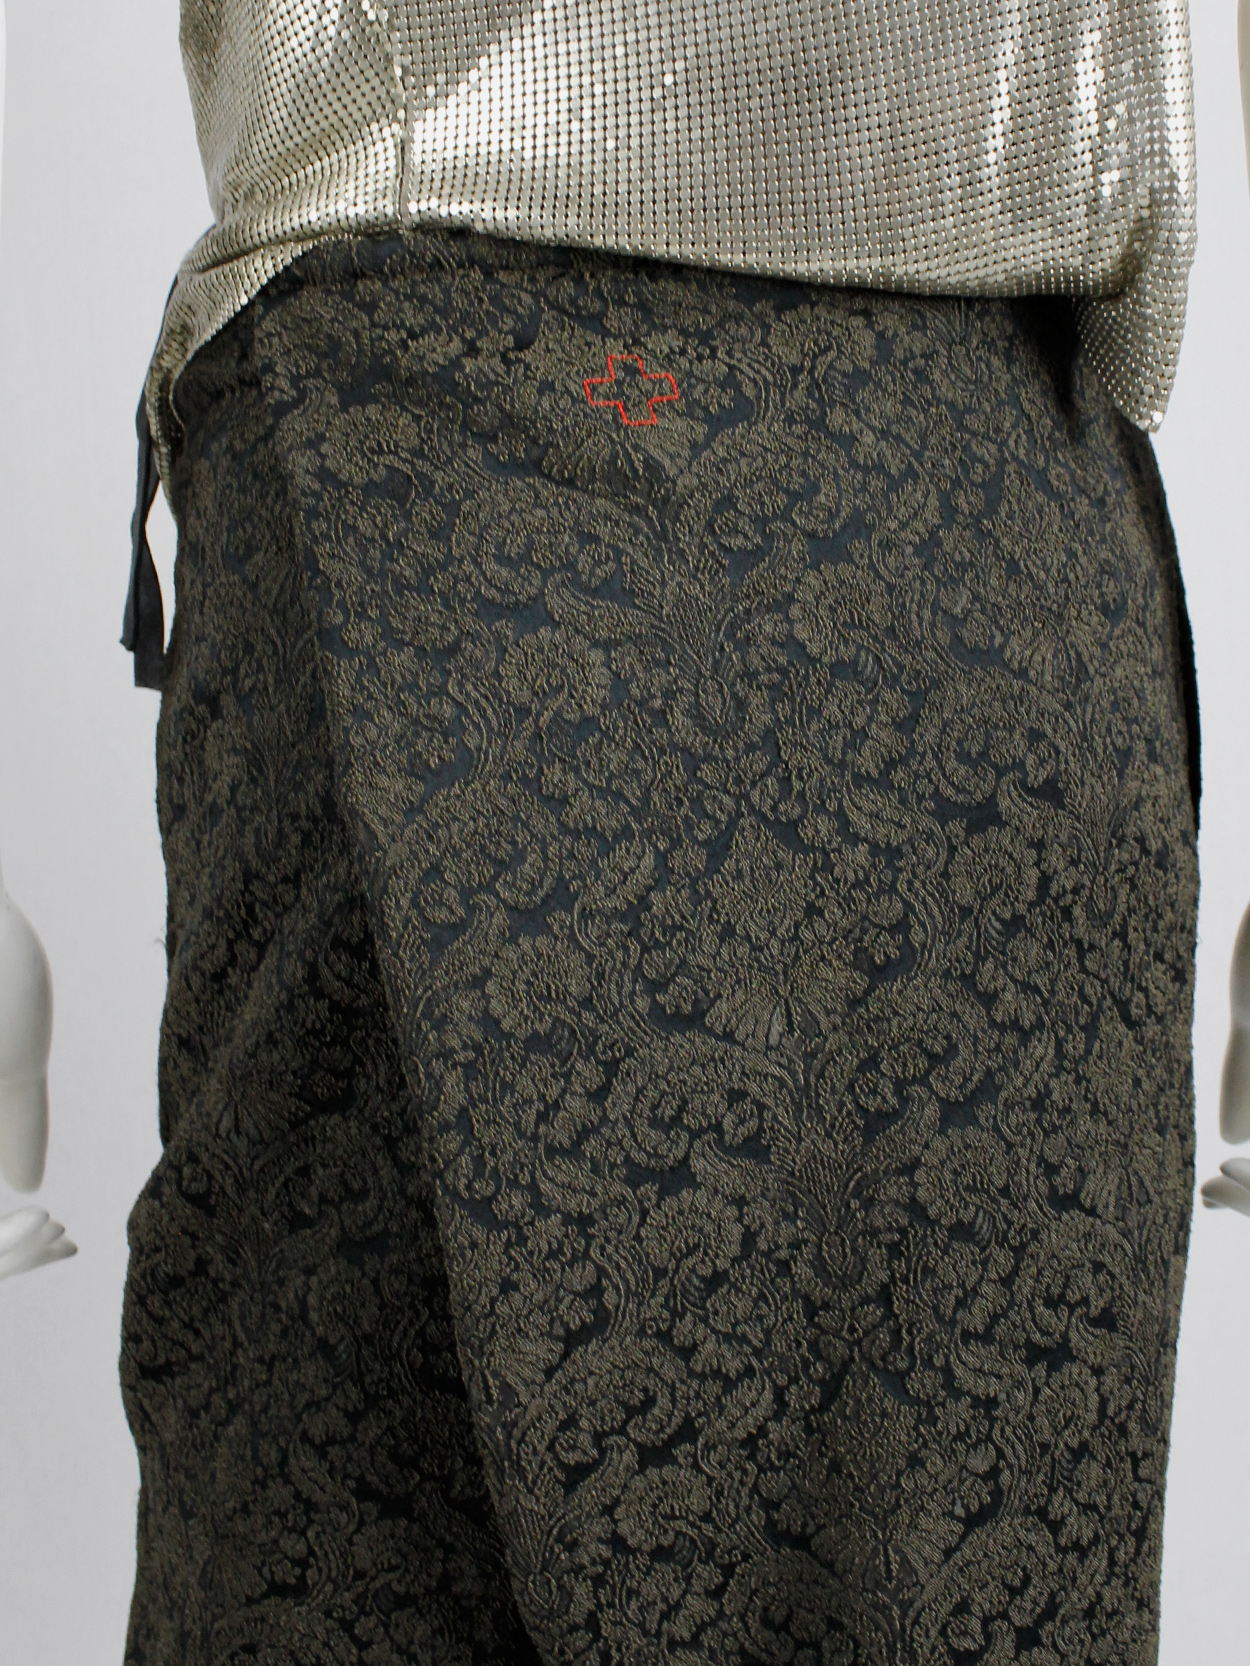 af Vandevorst black and brown brocade trousers with sharp front pleat fall 2014 (2)